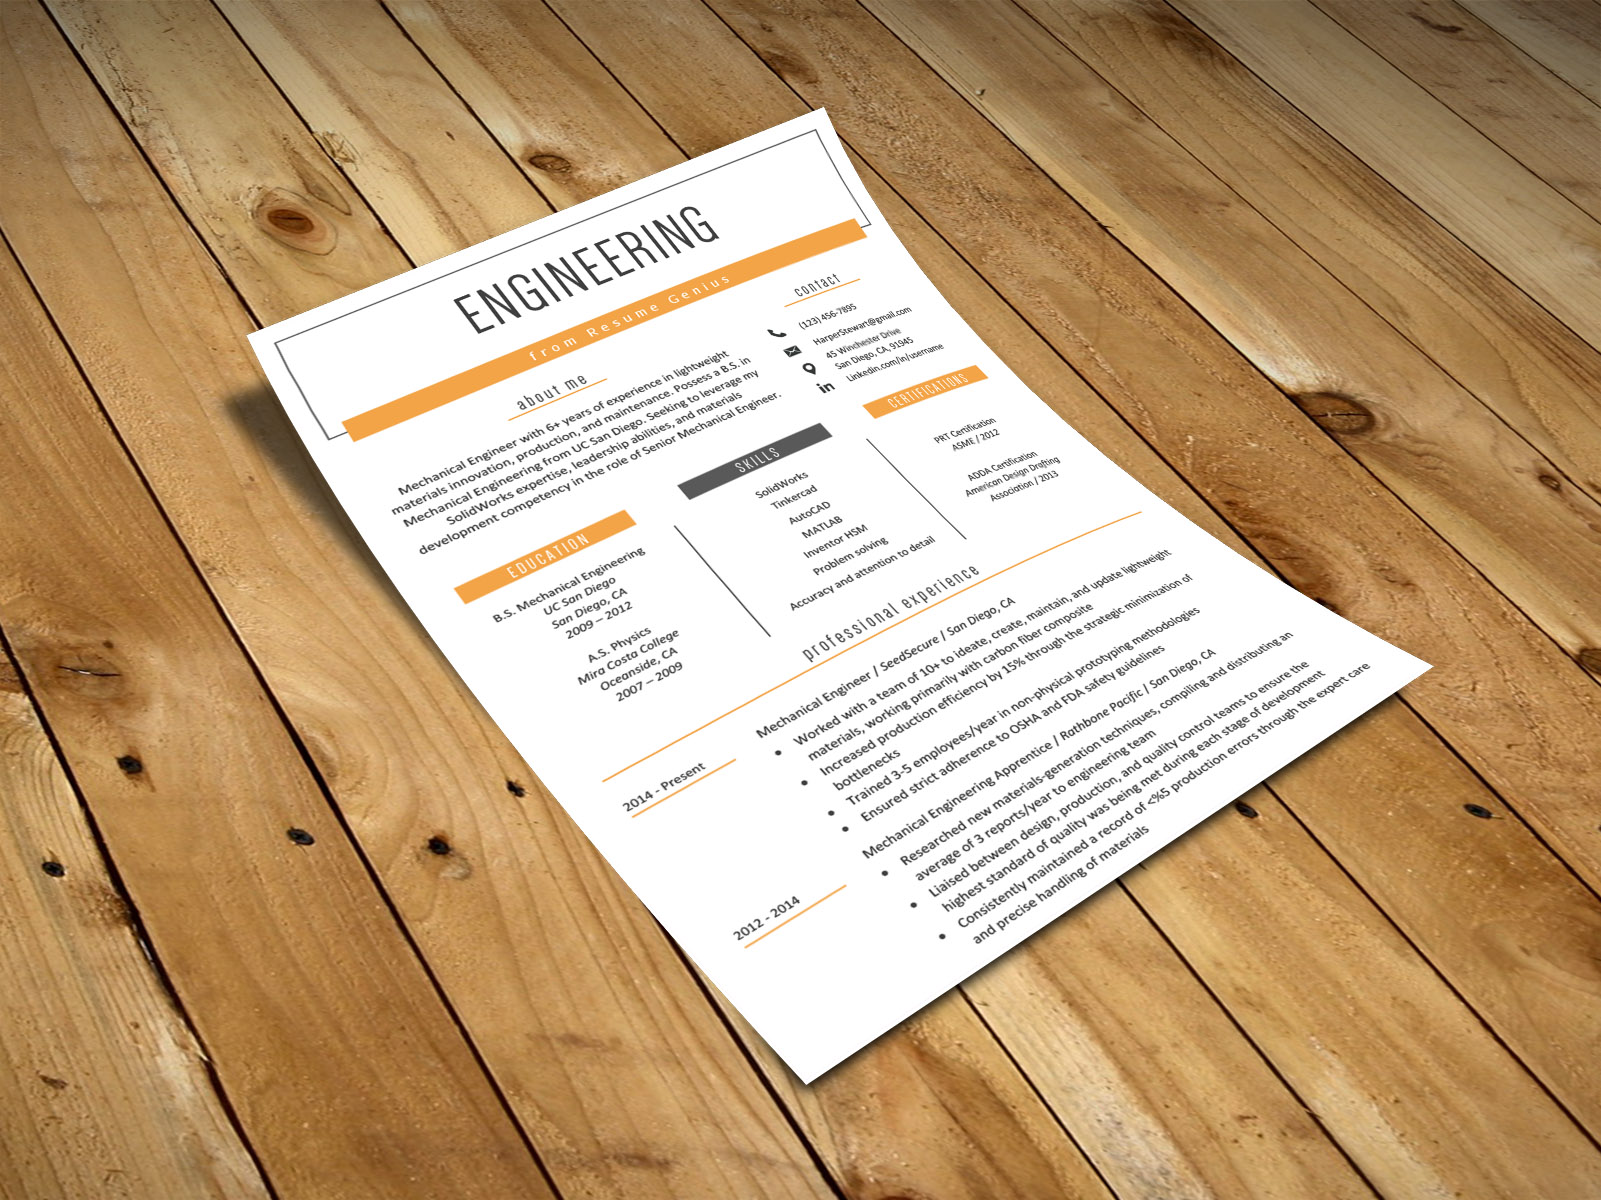 This CV/Resume Template has pretty much space for showcase your relevant information. You can easily edit and customize as you wish.